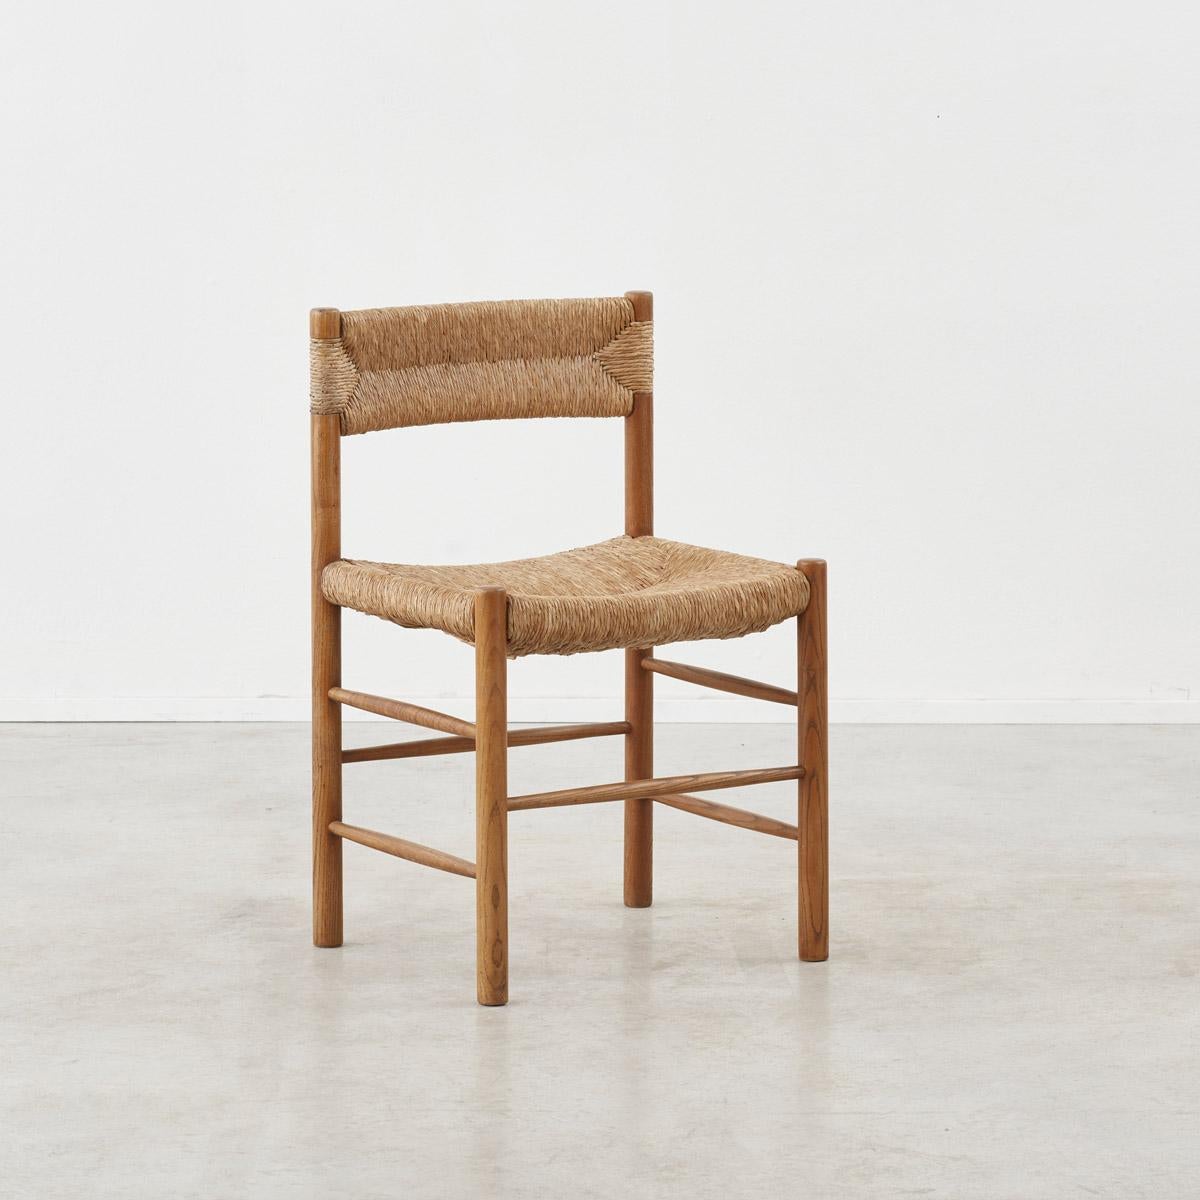 Woven Set of Six Charlotte Perriand Dordogne Chairs for Robert Sentou, France c1950 For Sale